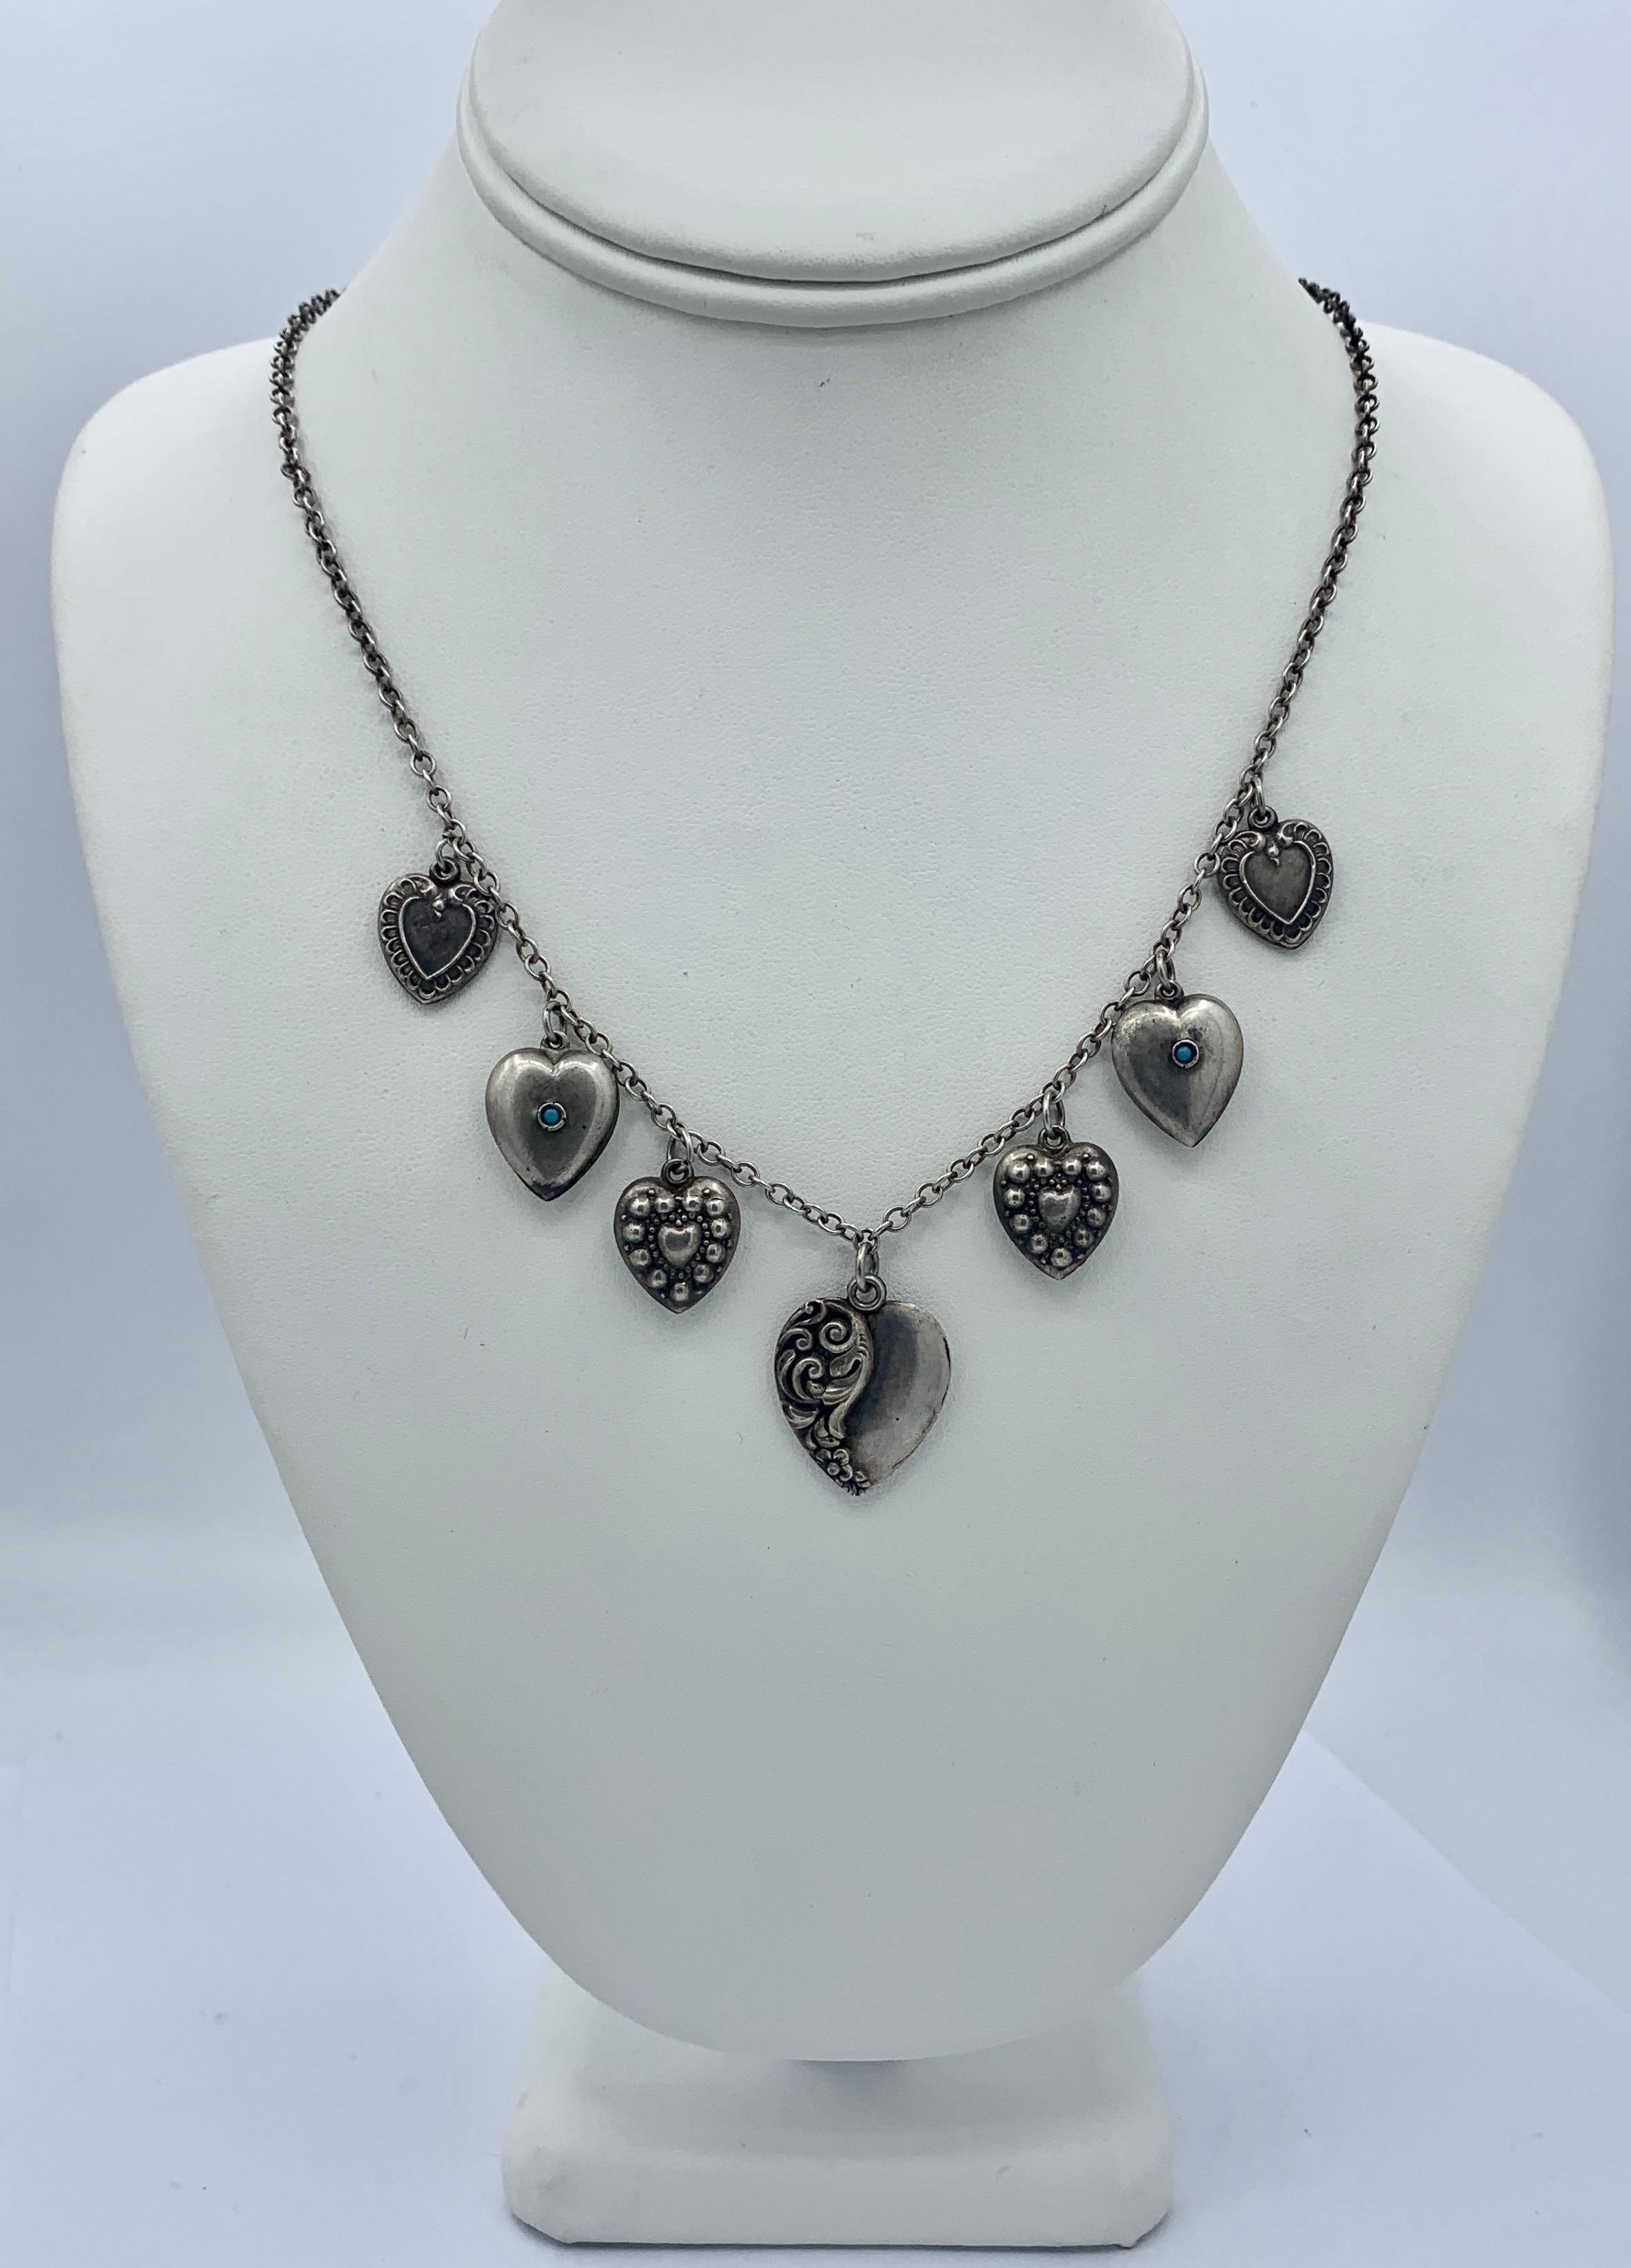 This is a beautiful Antique Victorian - Art Deco Puffy Heart Pendant or Charm Necklace in Sterling Silver with Turquoise adornments.   The seven heart charms are beautifully made and each one is signed Sterling.  Two are adorned with Turquoise